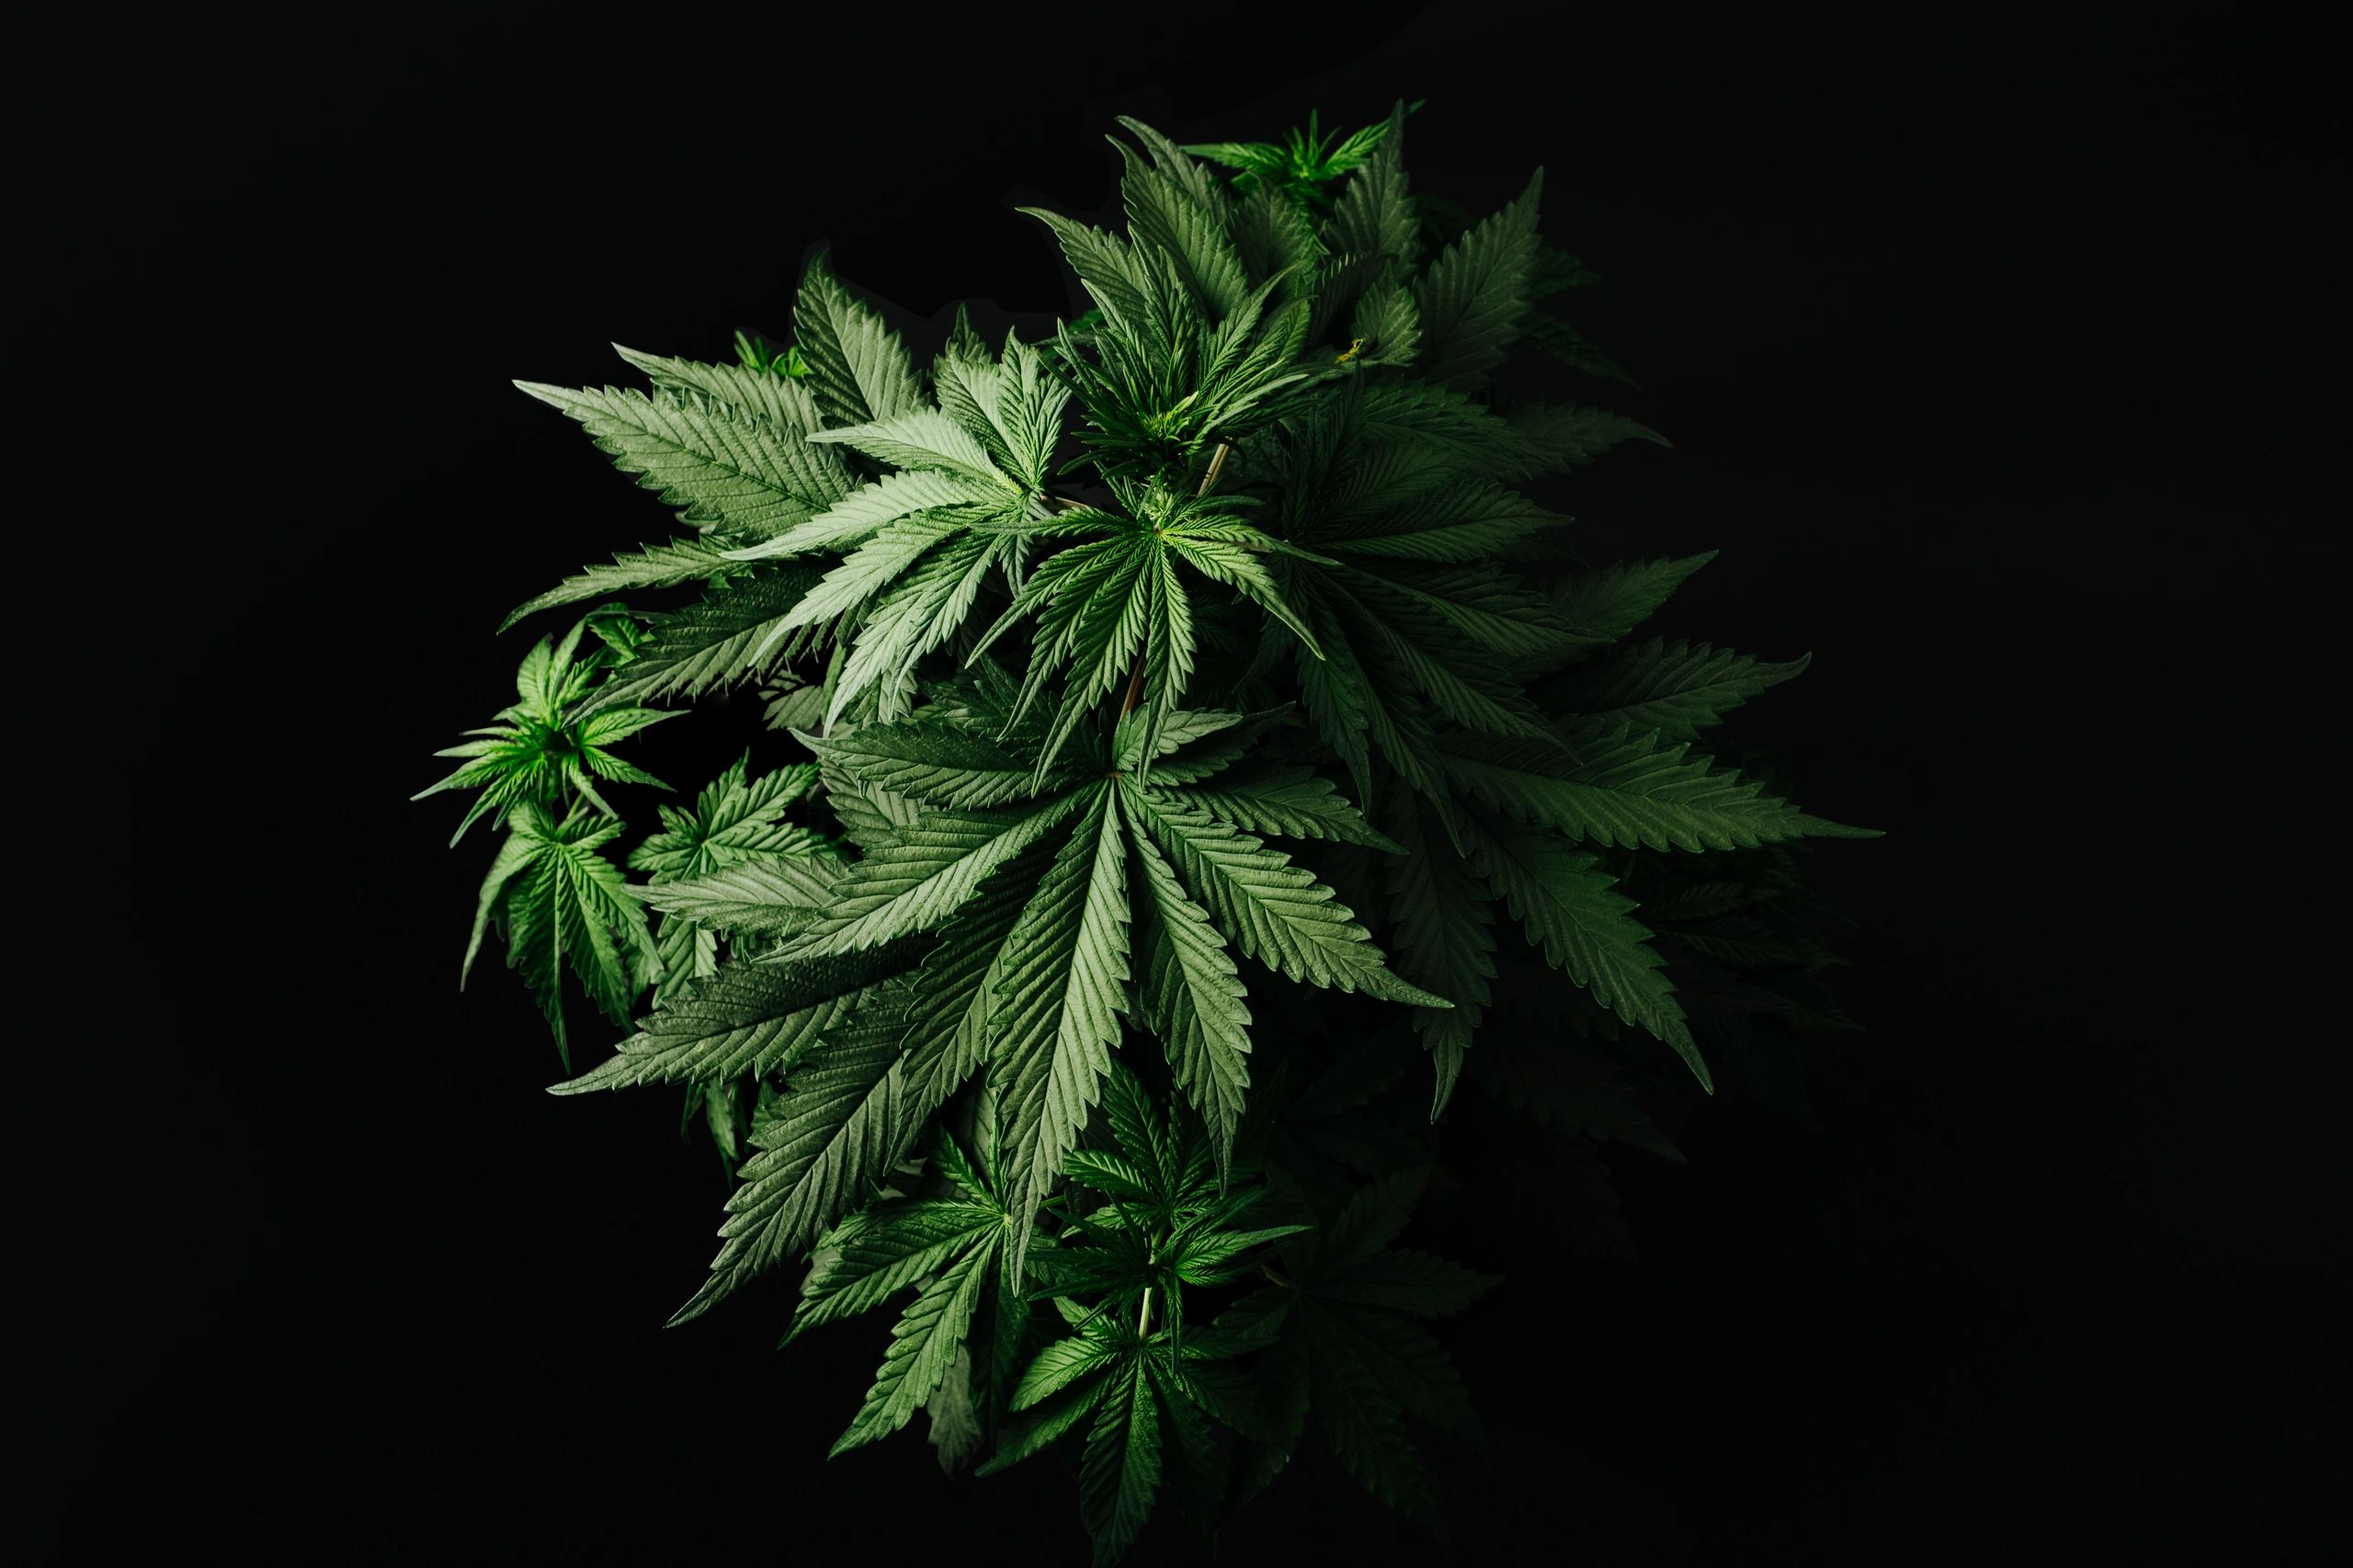 Featured image presenting a healthy cannabis indica plant in its late vegetative stage.